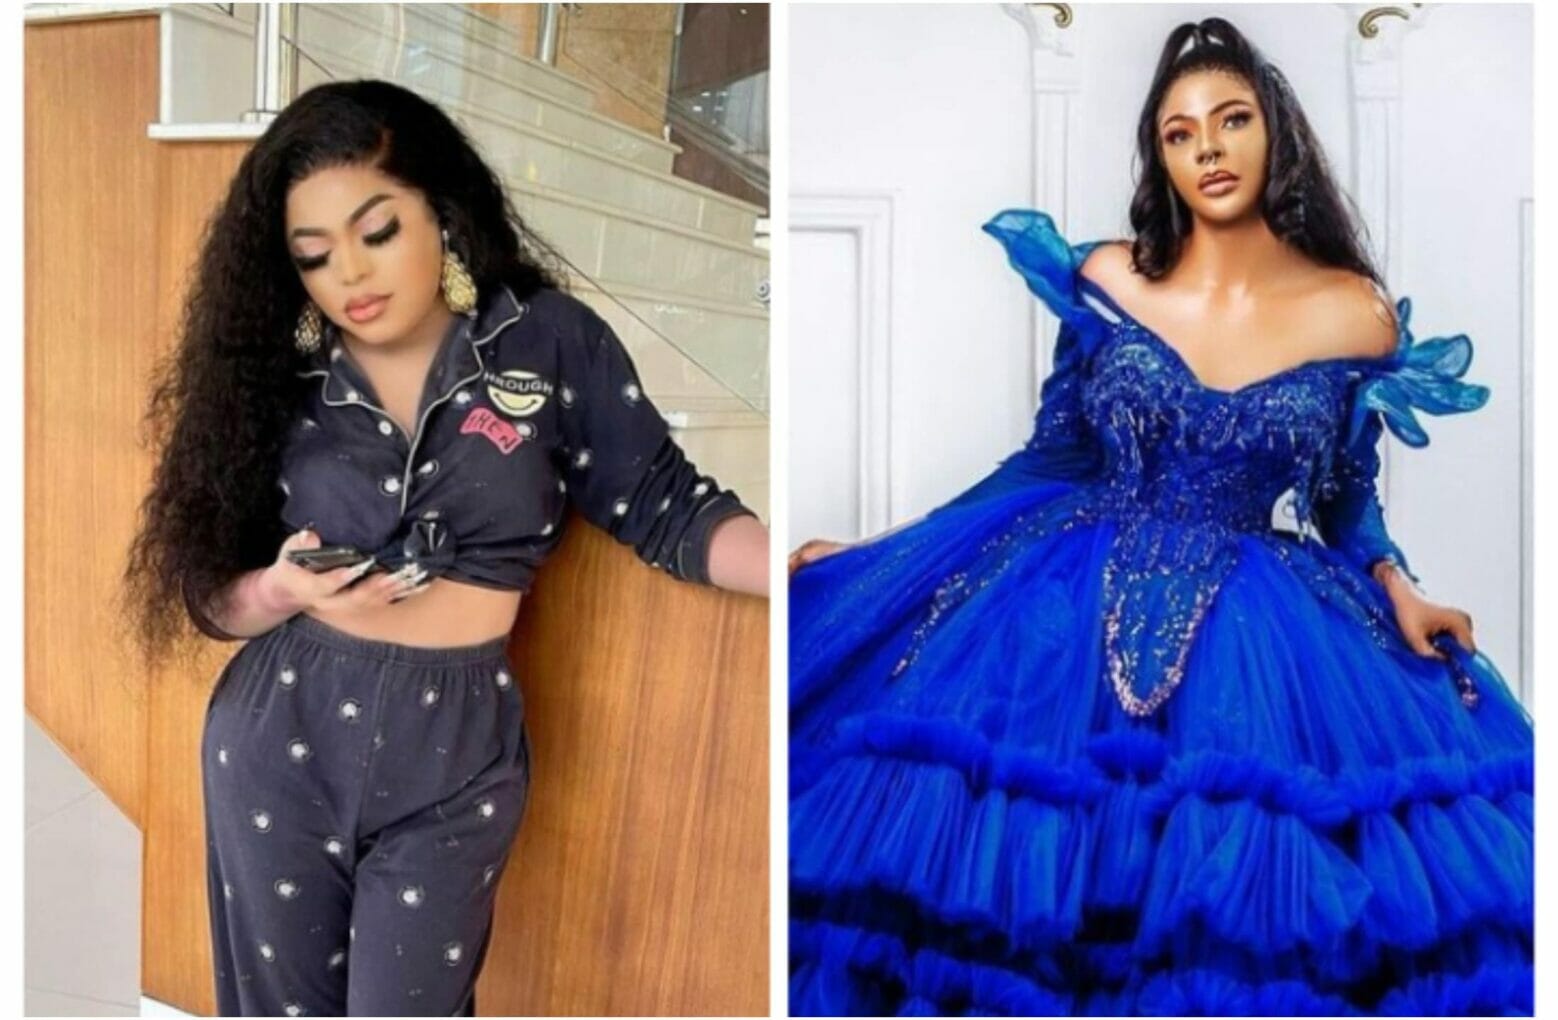 Bobrisky to forfeit his crown for new mentee